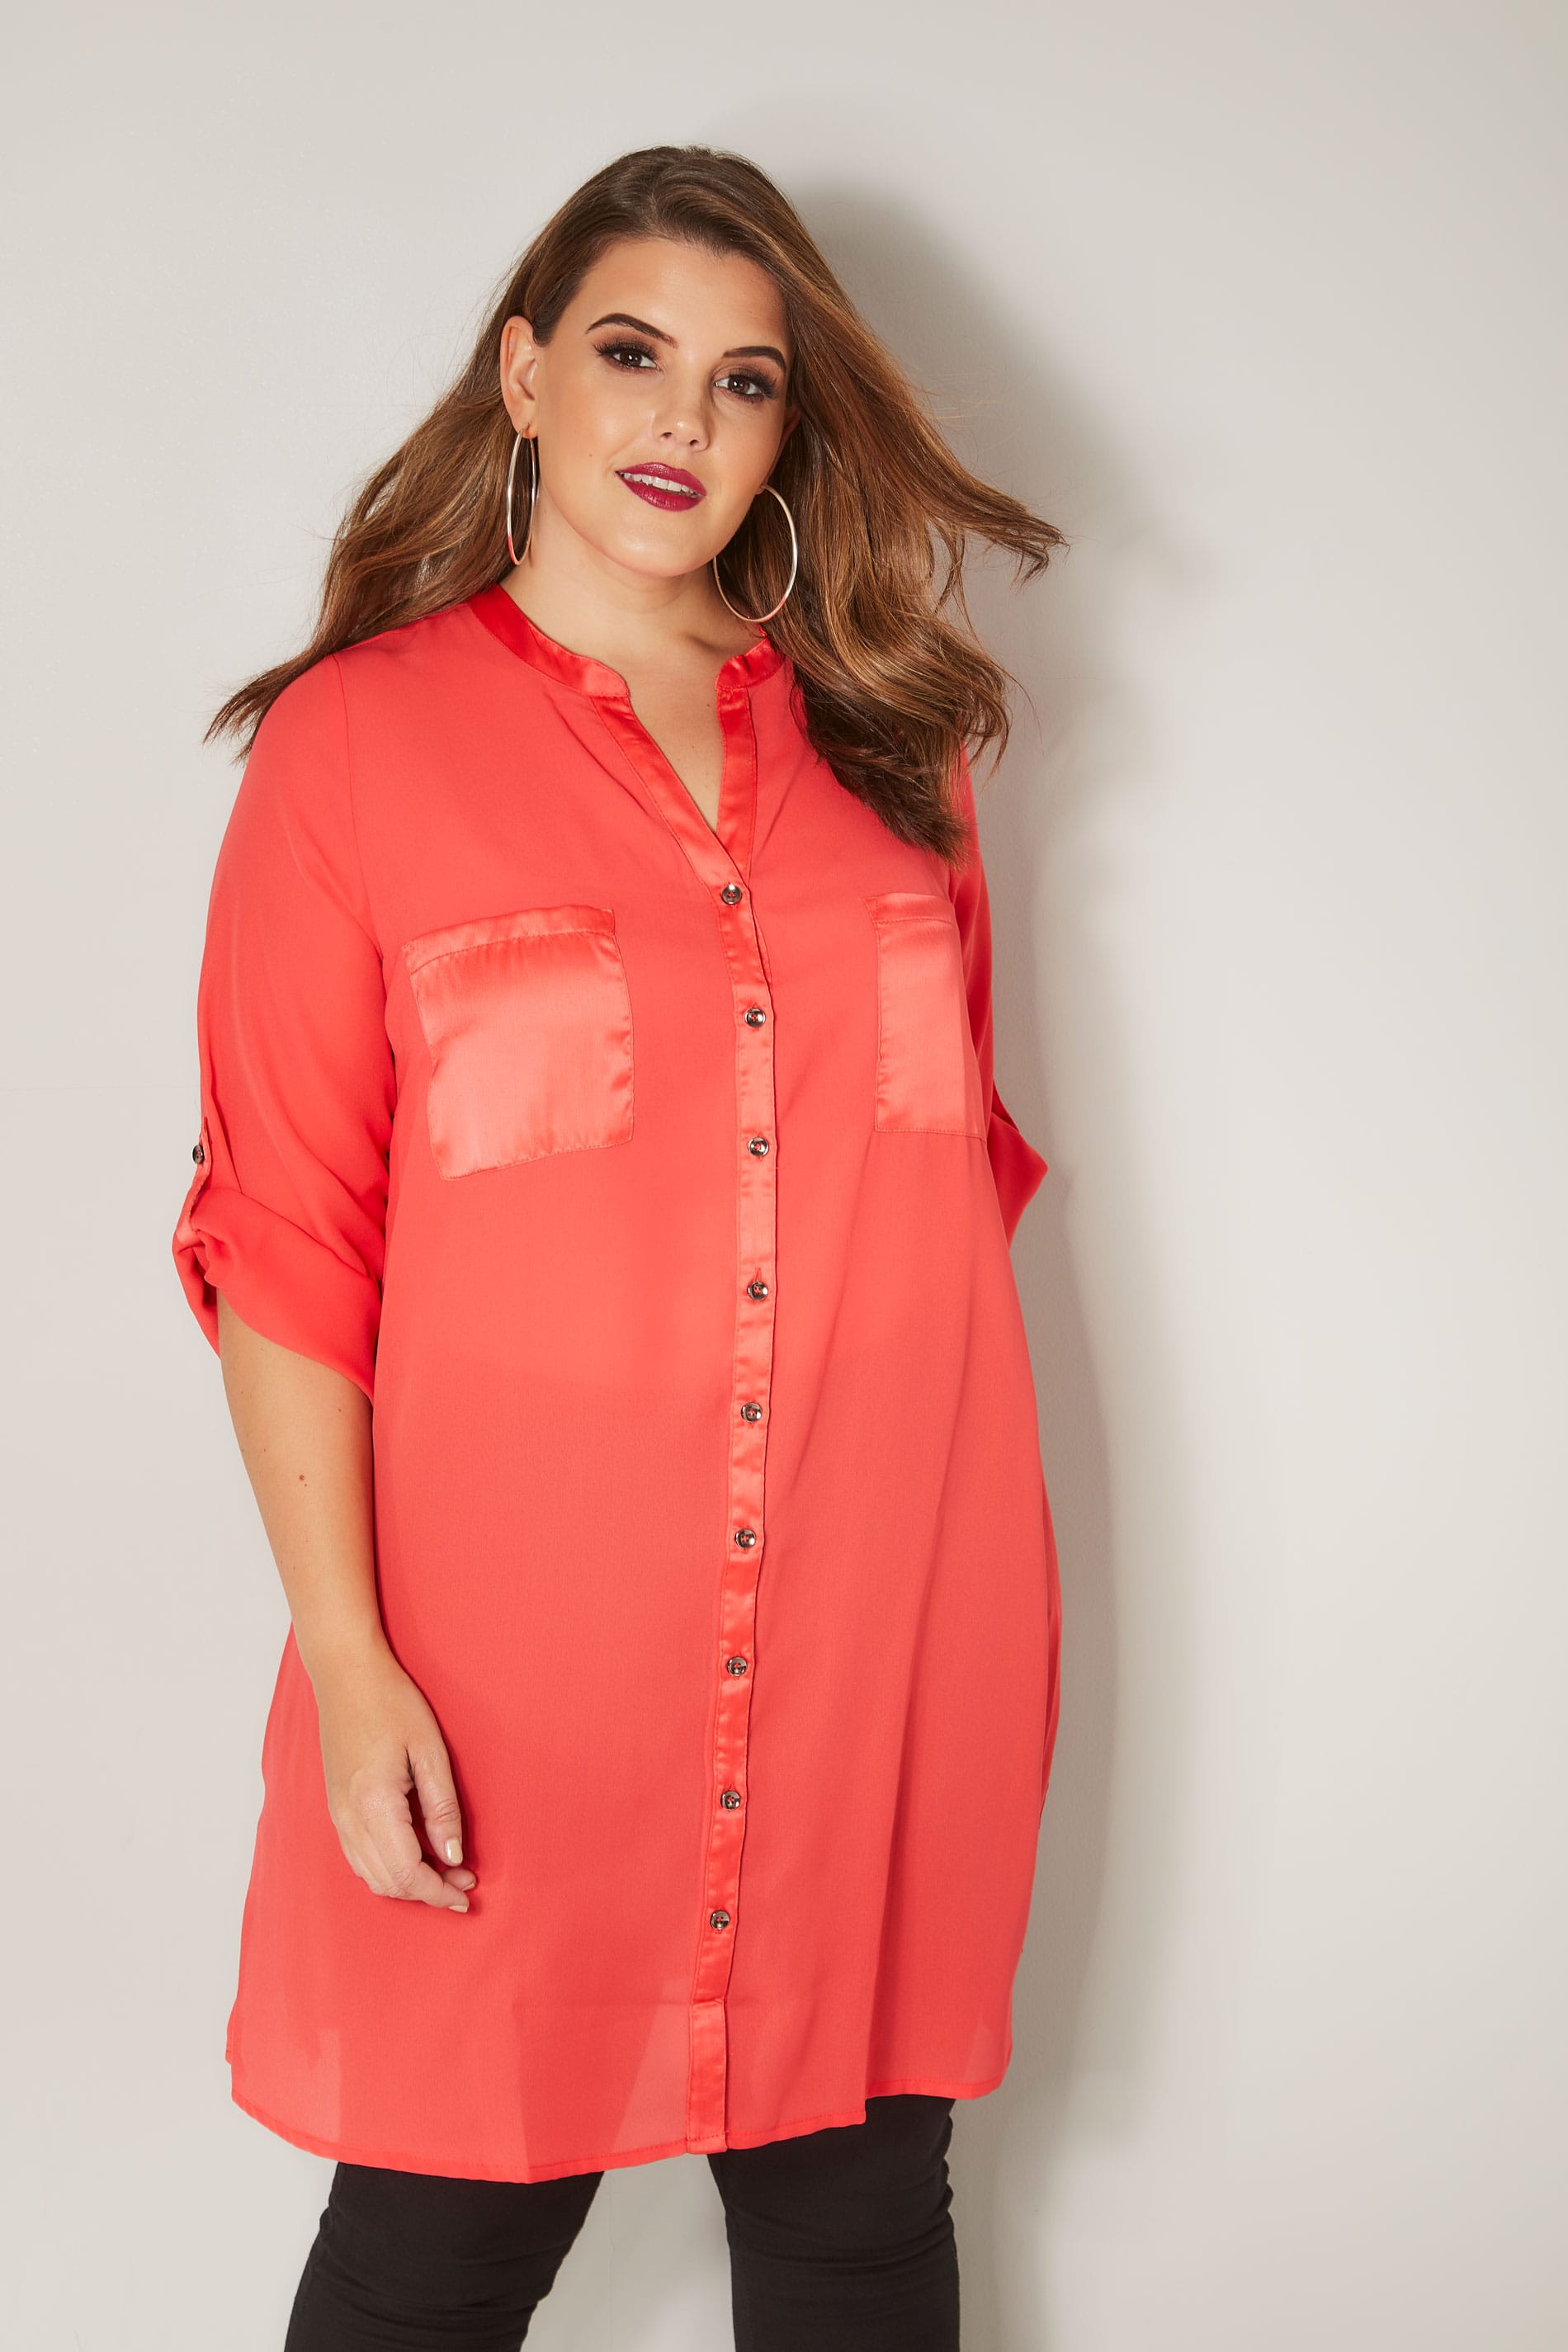 YOURS LONDON Coral Chiffon Blouse With Satin Trim, plus size 16 to 32